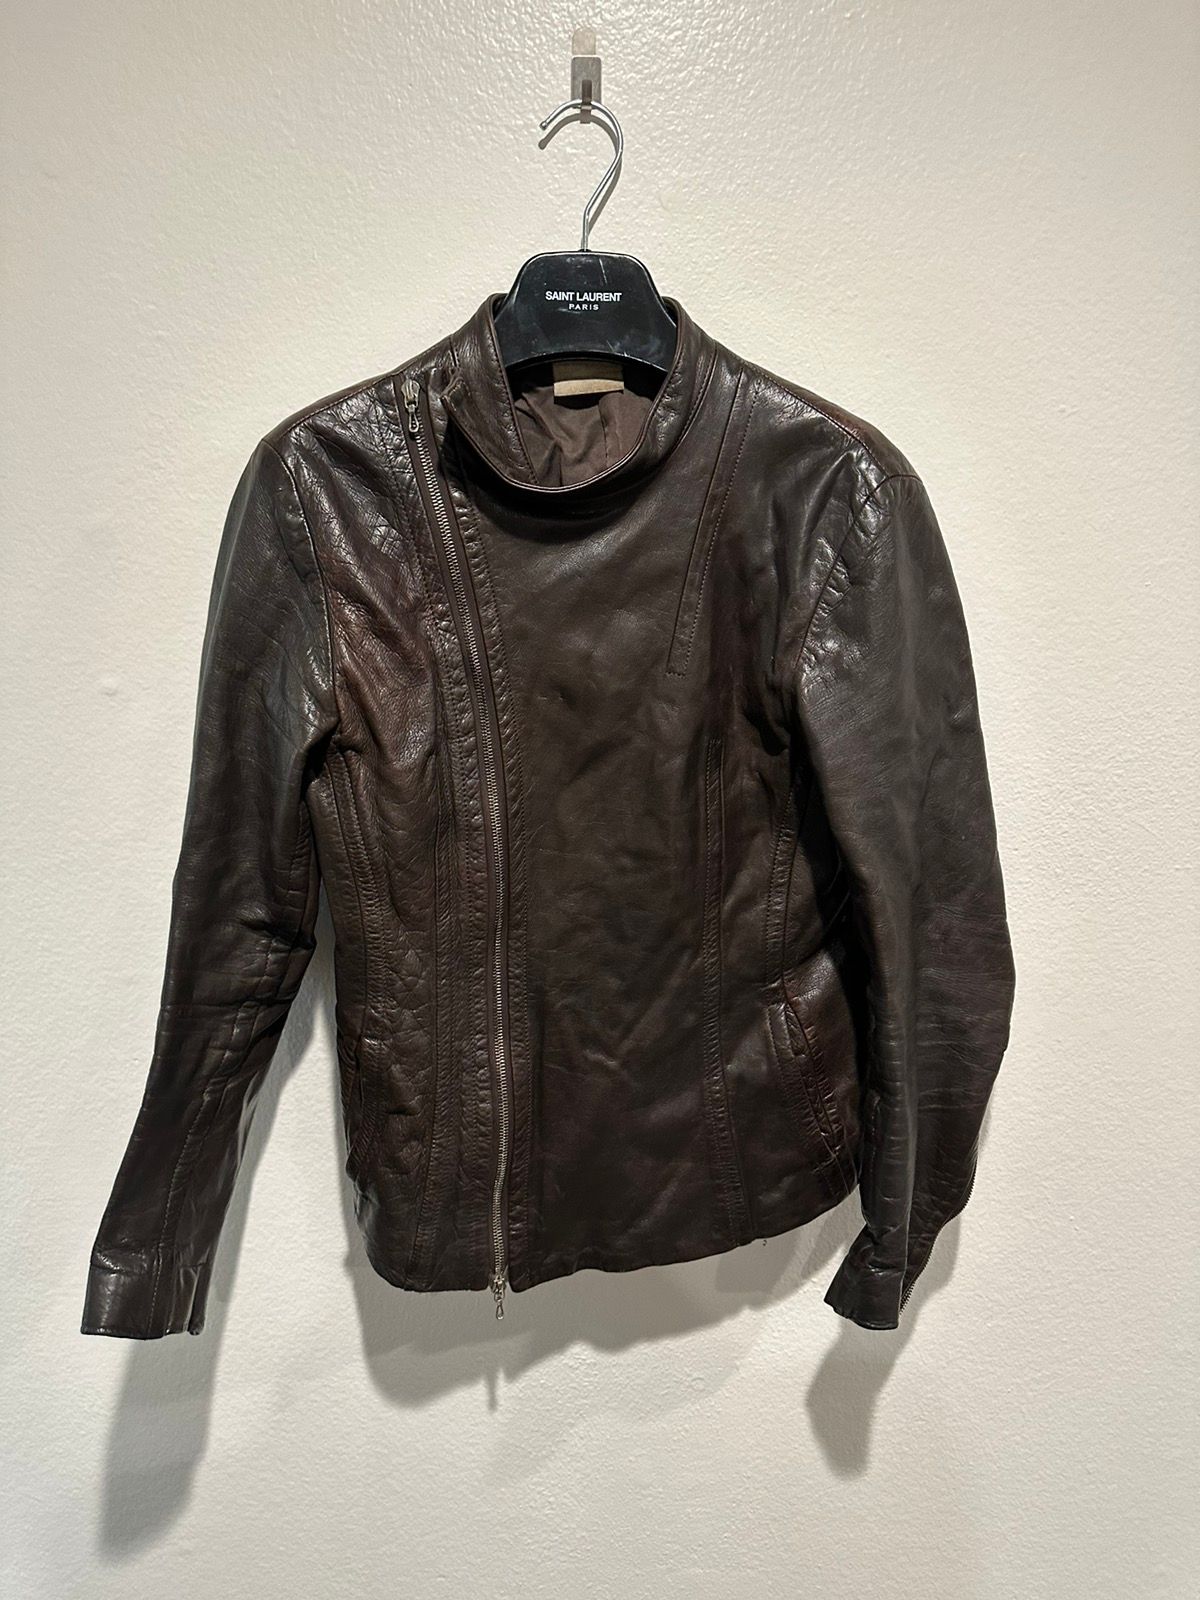 Julius AW05 Thieves Leather Fencing Jacket | Grailed